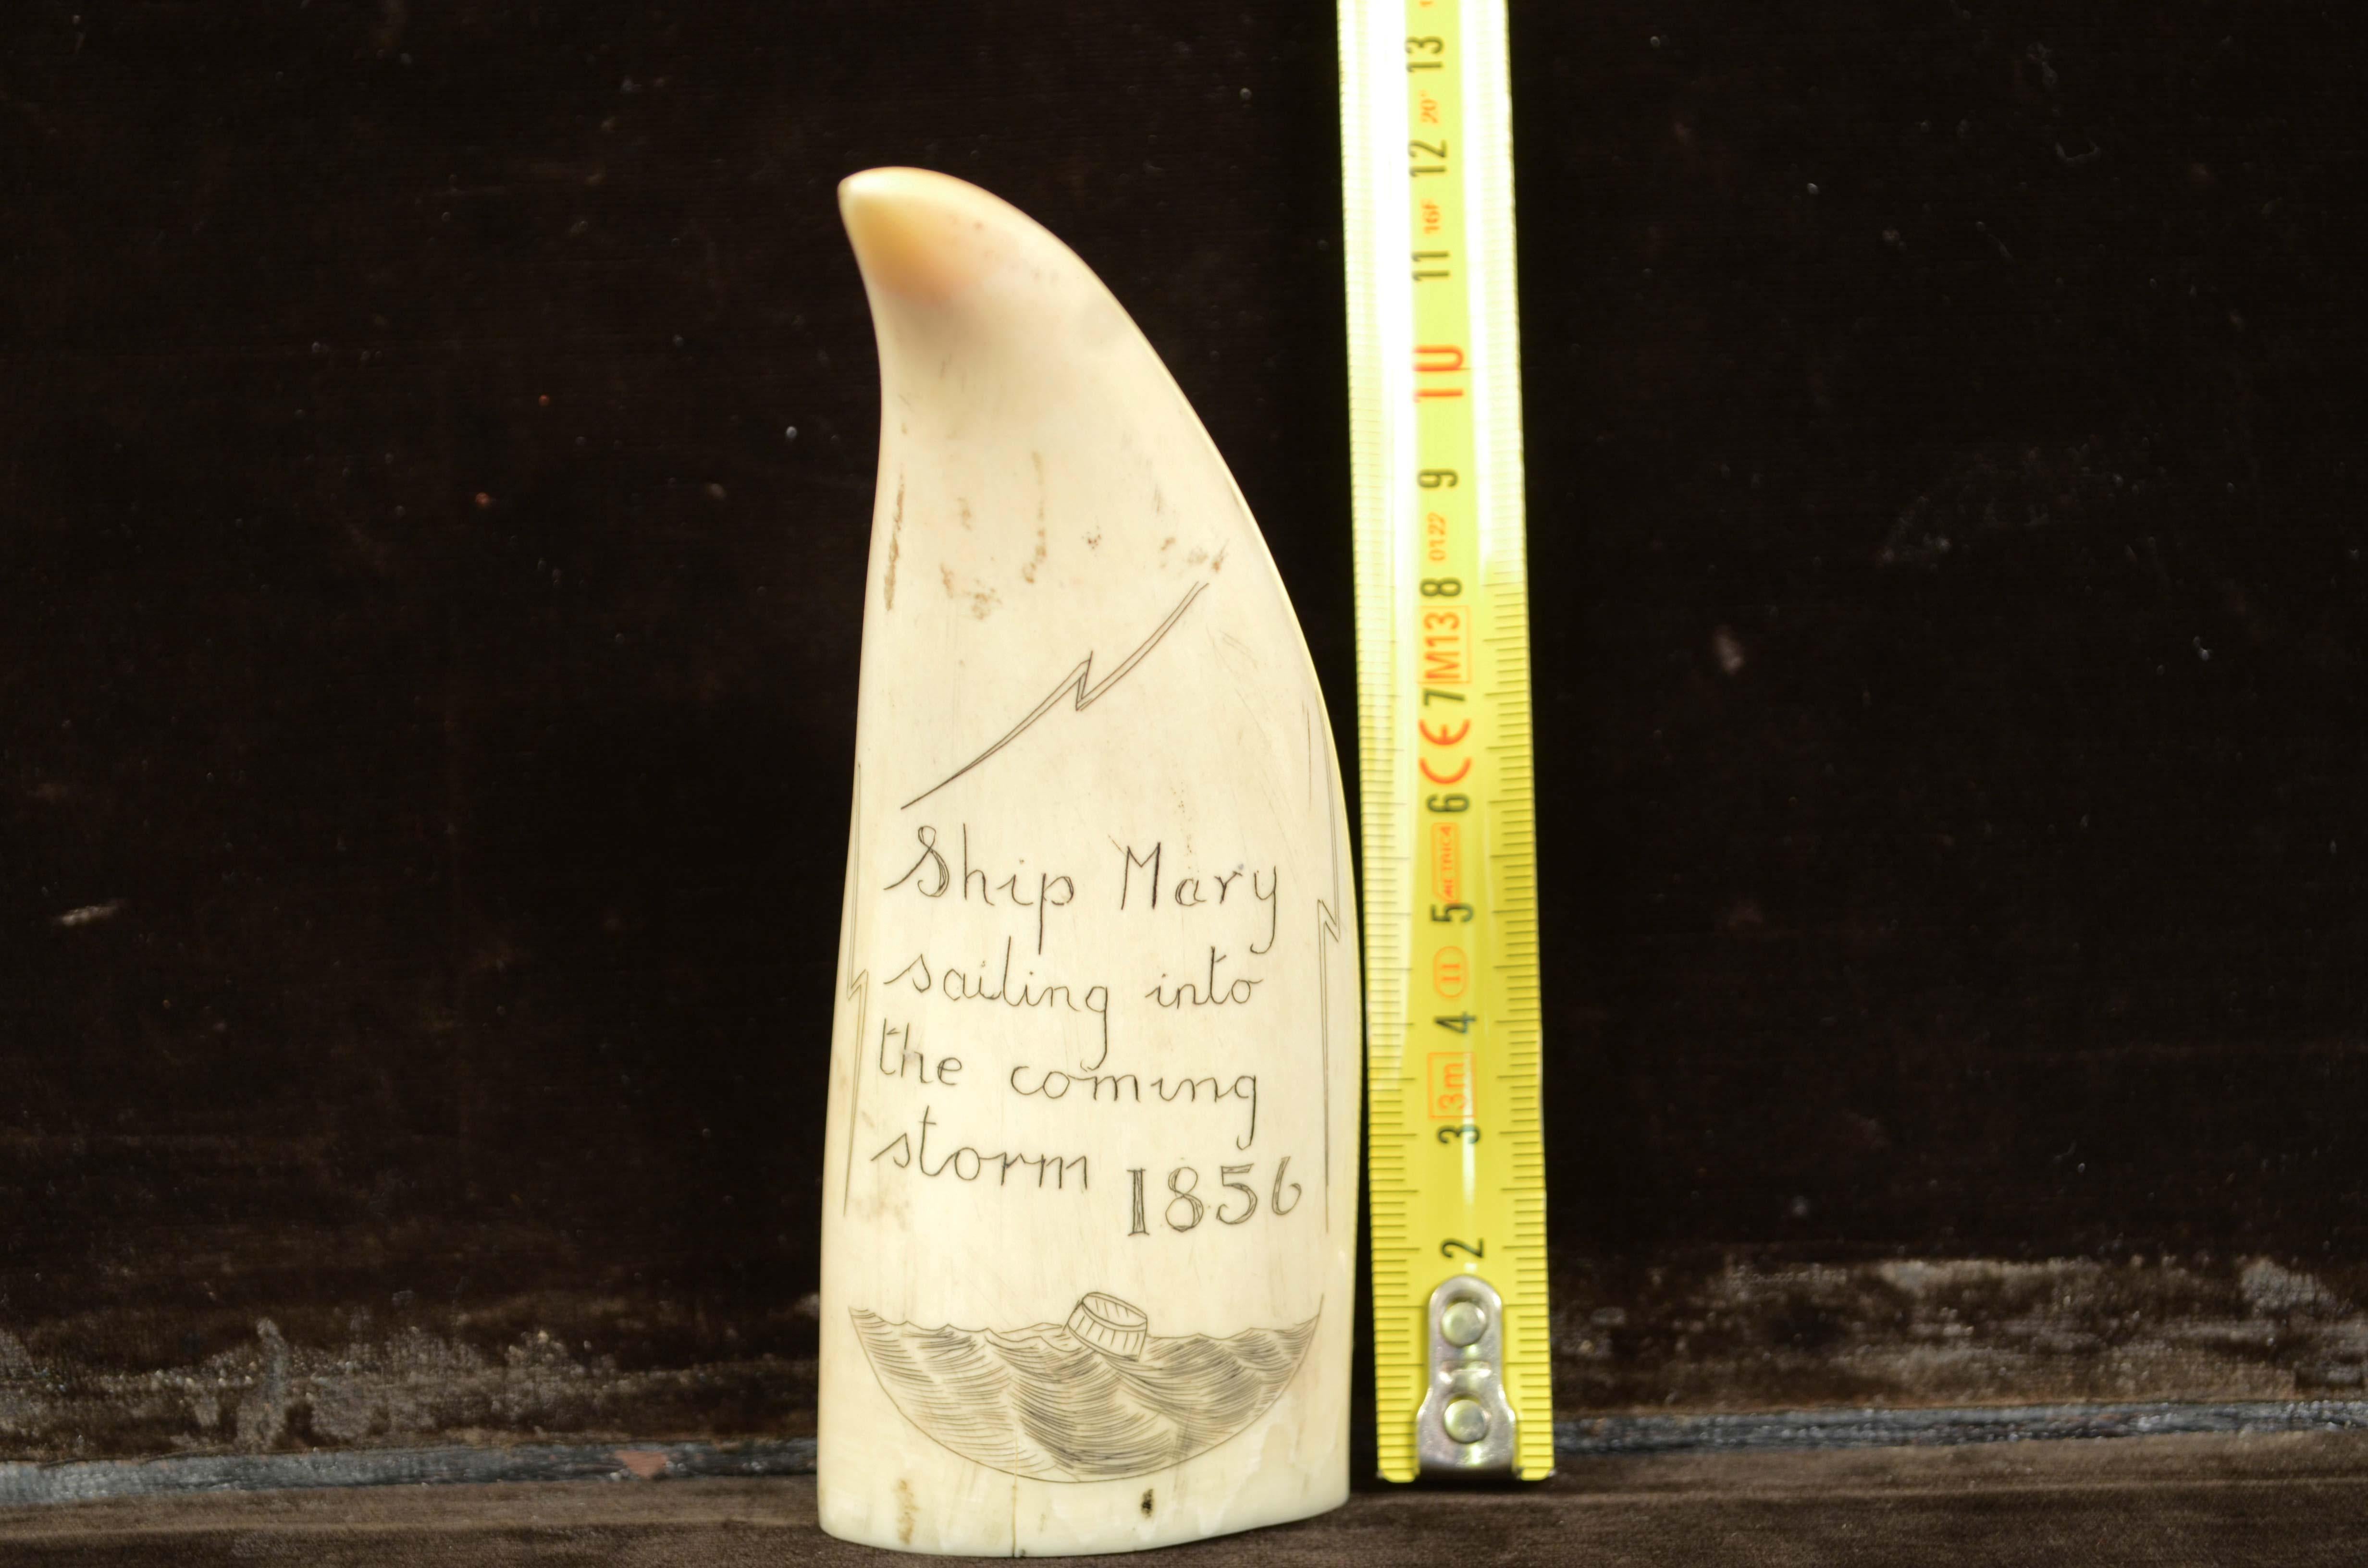 Scrimshaw of a vertically engraved whale tooth, very good workmanship, dated 1856, length 12 cm.
Depicting a brig in - Storm. The reverse of the tooth has the engraving Ship Mary sailing into the coming storm
1856.
Very good condition. 12X4.6x3.1